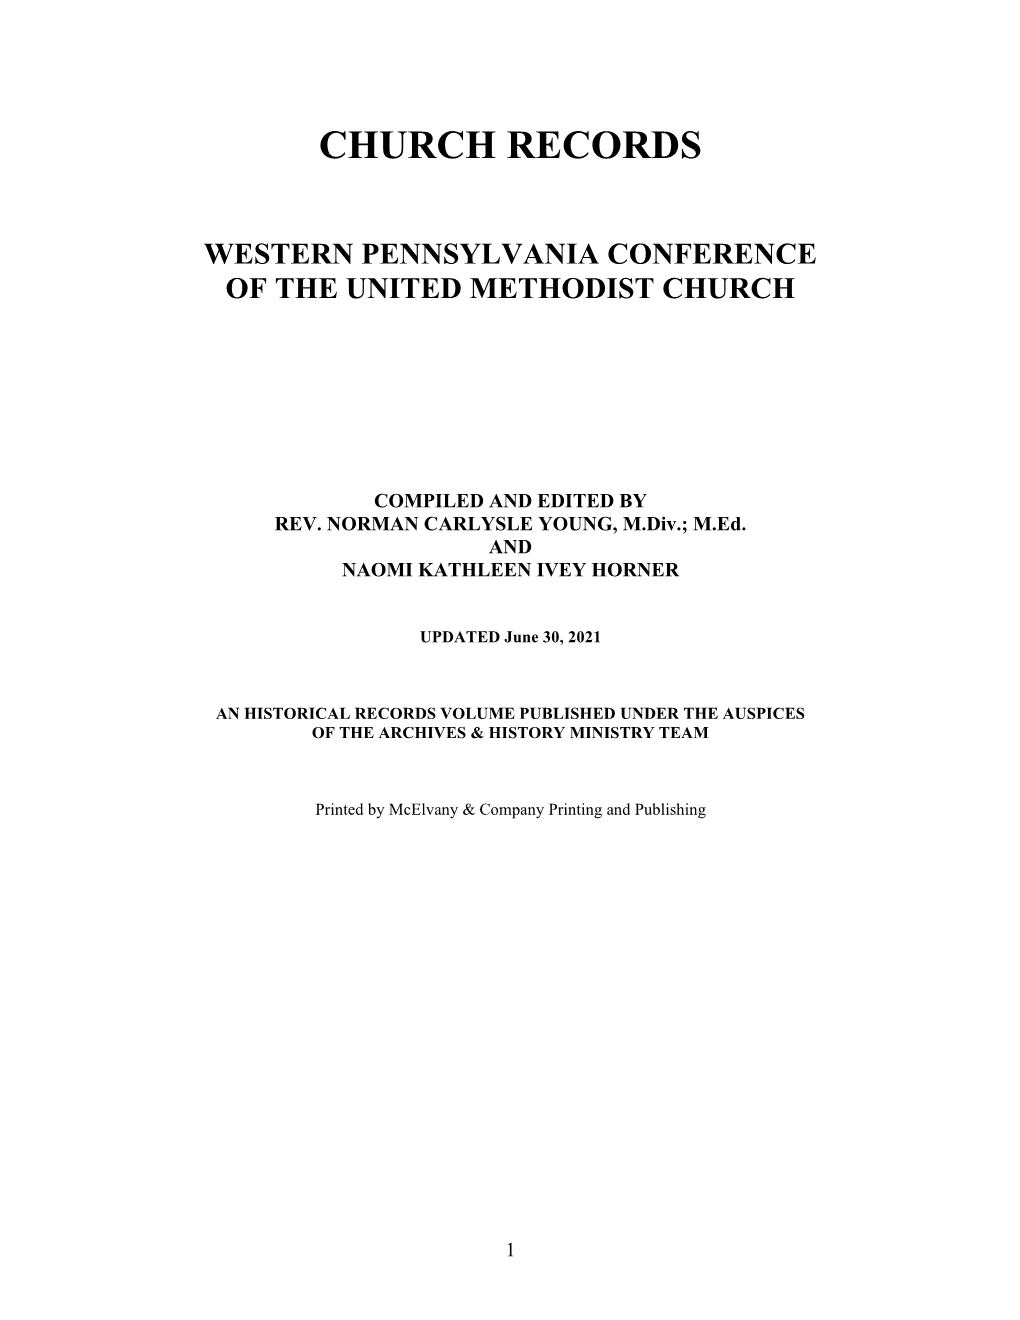 Western Pennsylvania Conference of the United Methodist Church